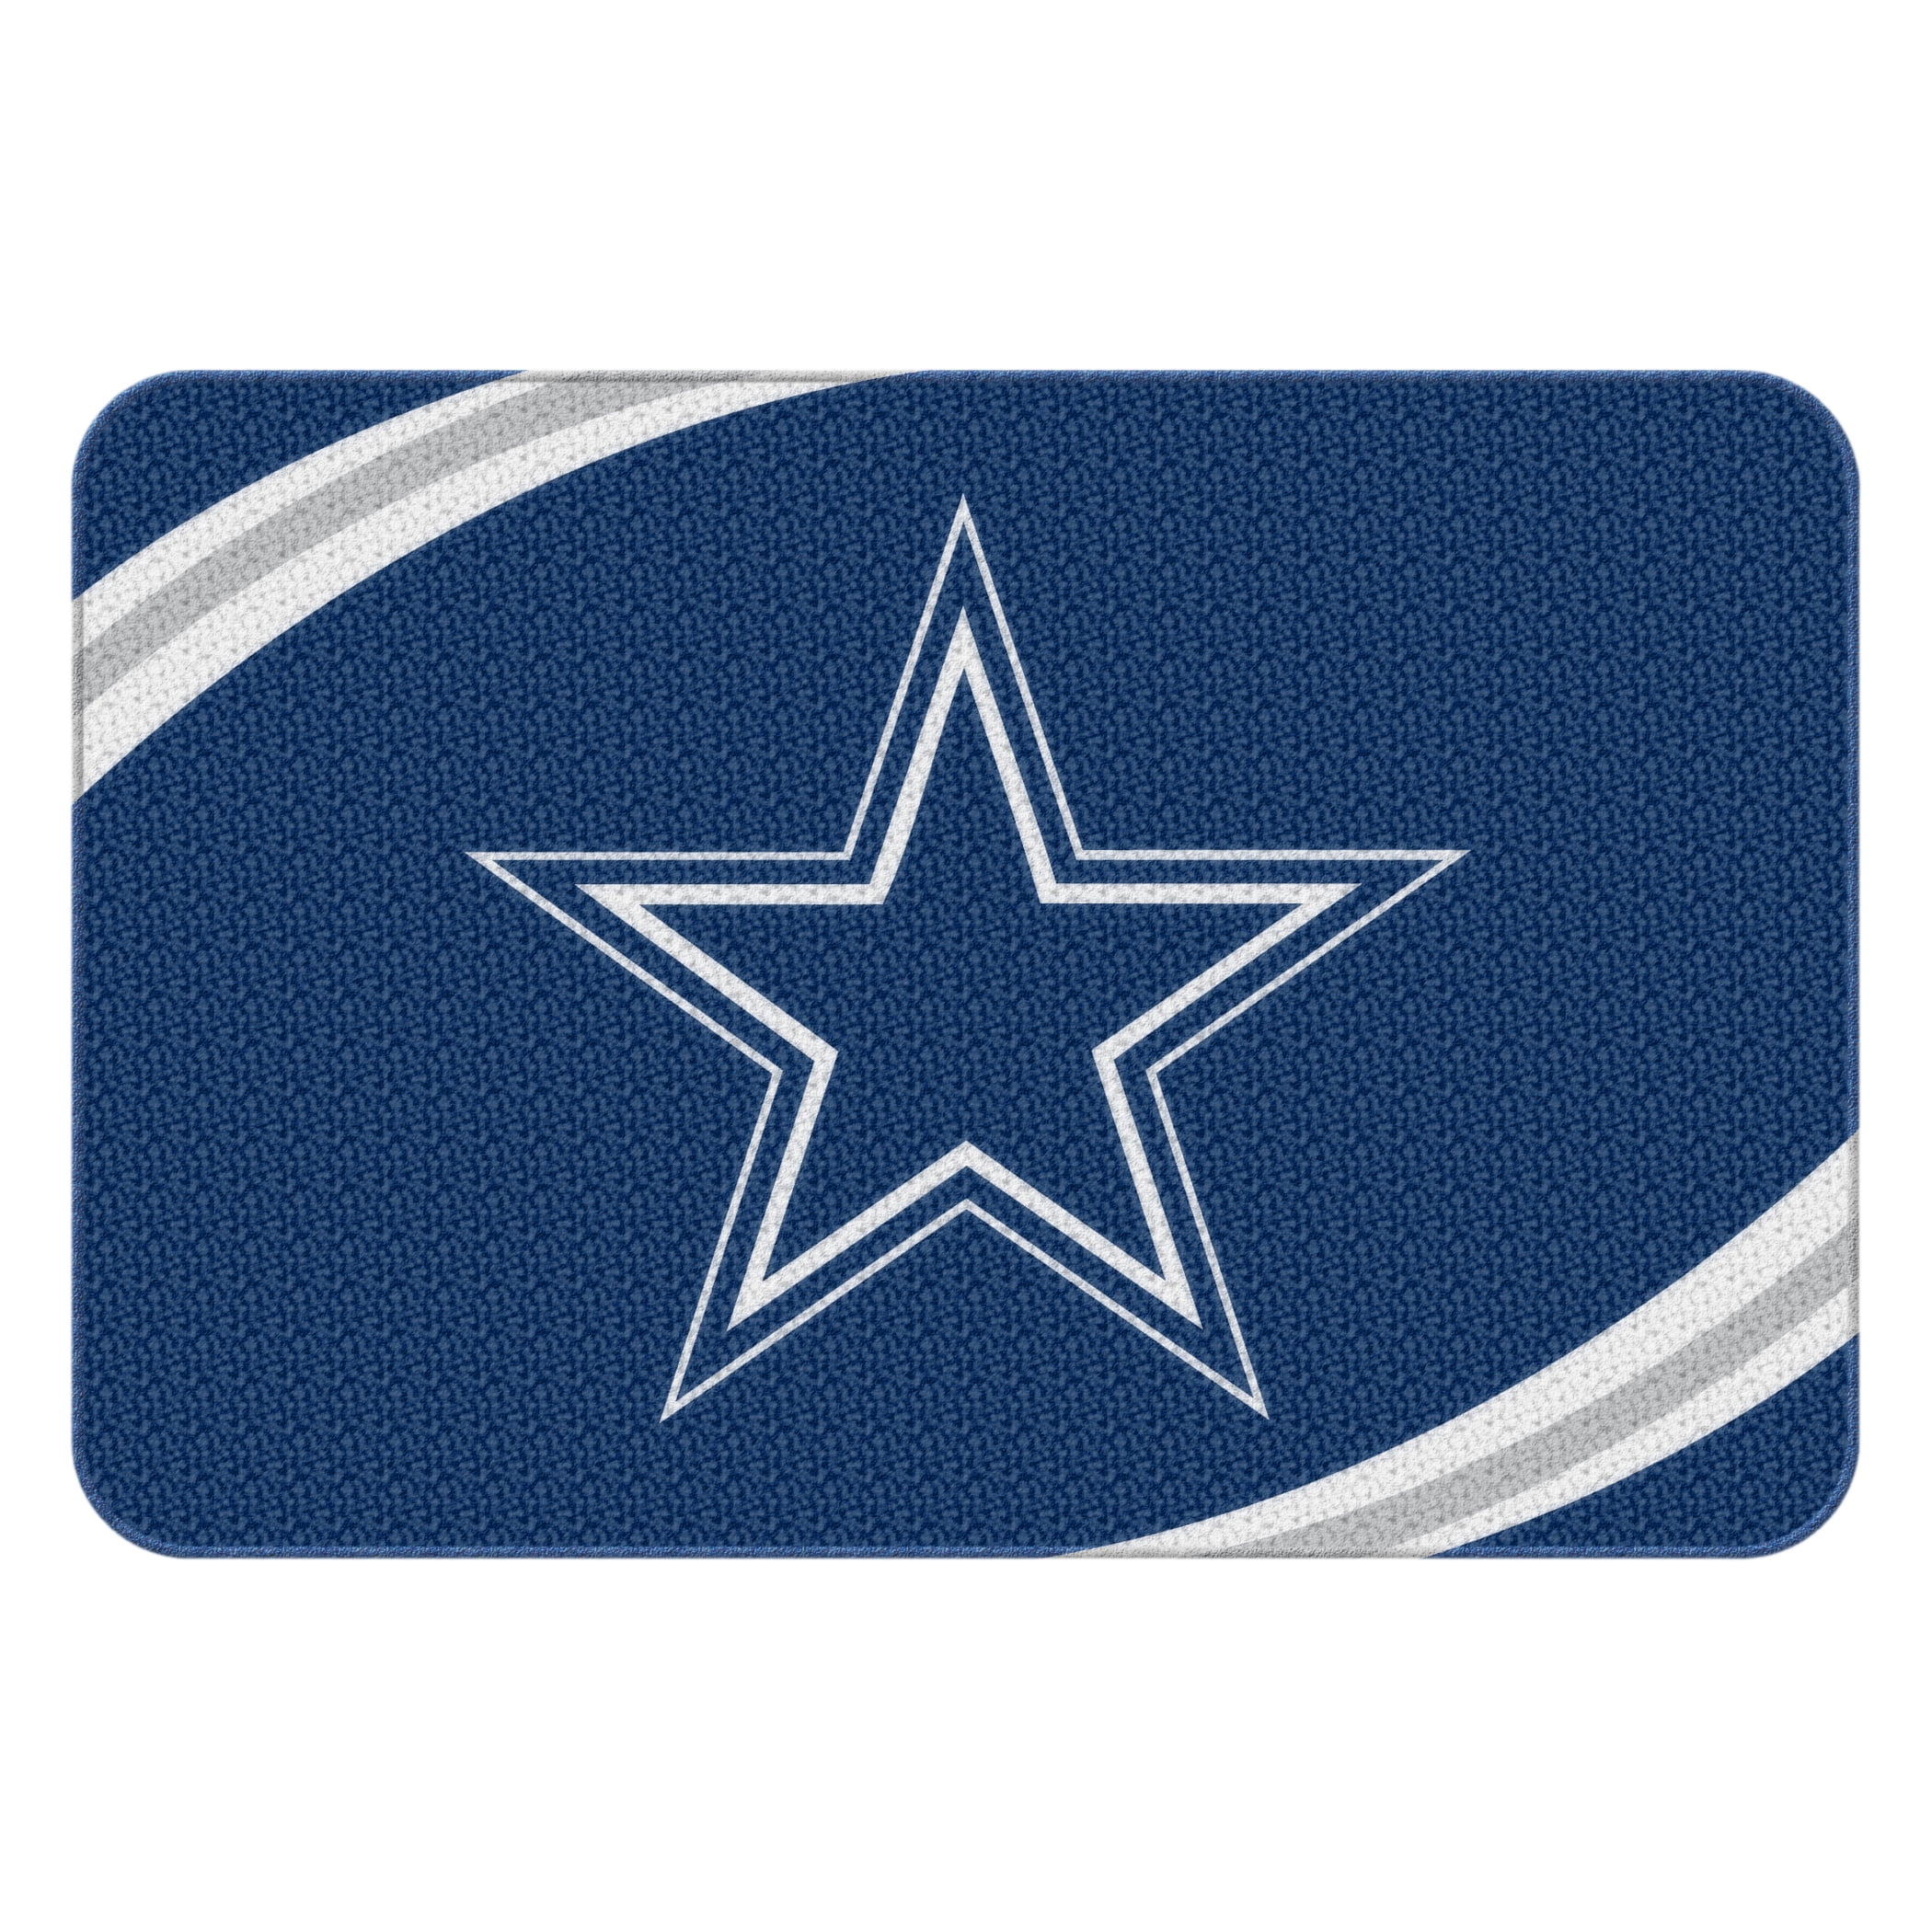 Details about   Dallas Cowboys Bathroom Rugs 4PCS Shower Curtain An-Skid Toilet Seat Cover Gifts 